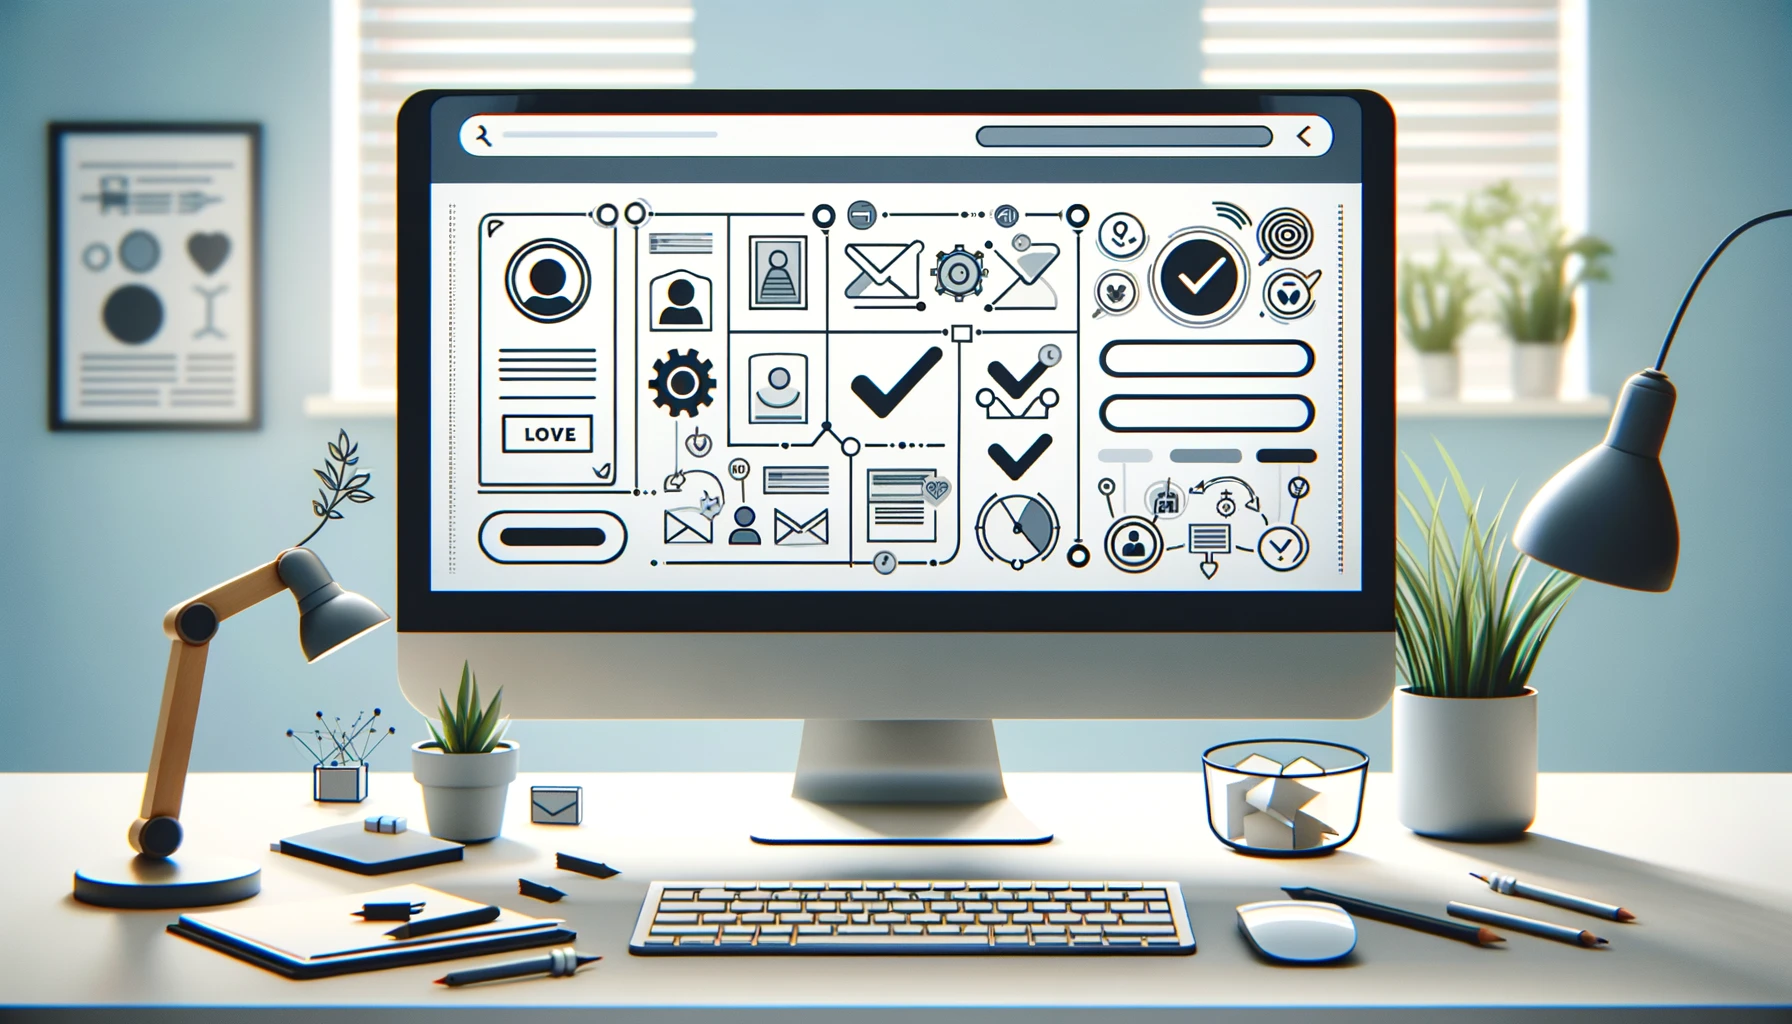 Symbols and design elements on a computer screen symbolize optimal Landing Page User Experience, focusing on user-friendly, efficient interactions.